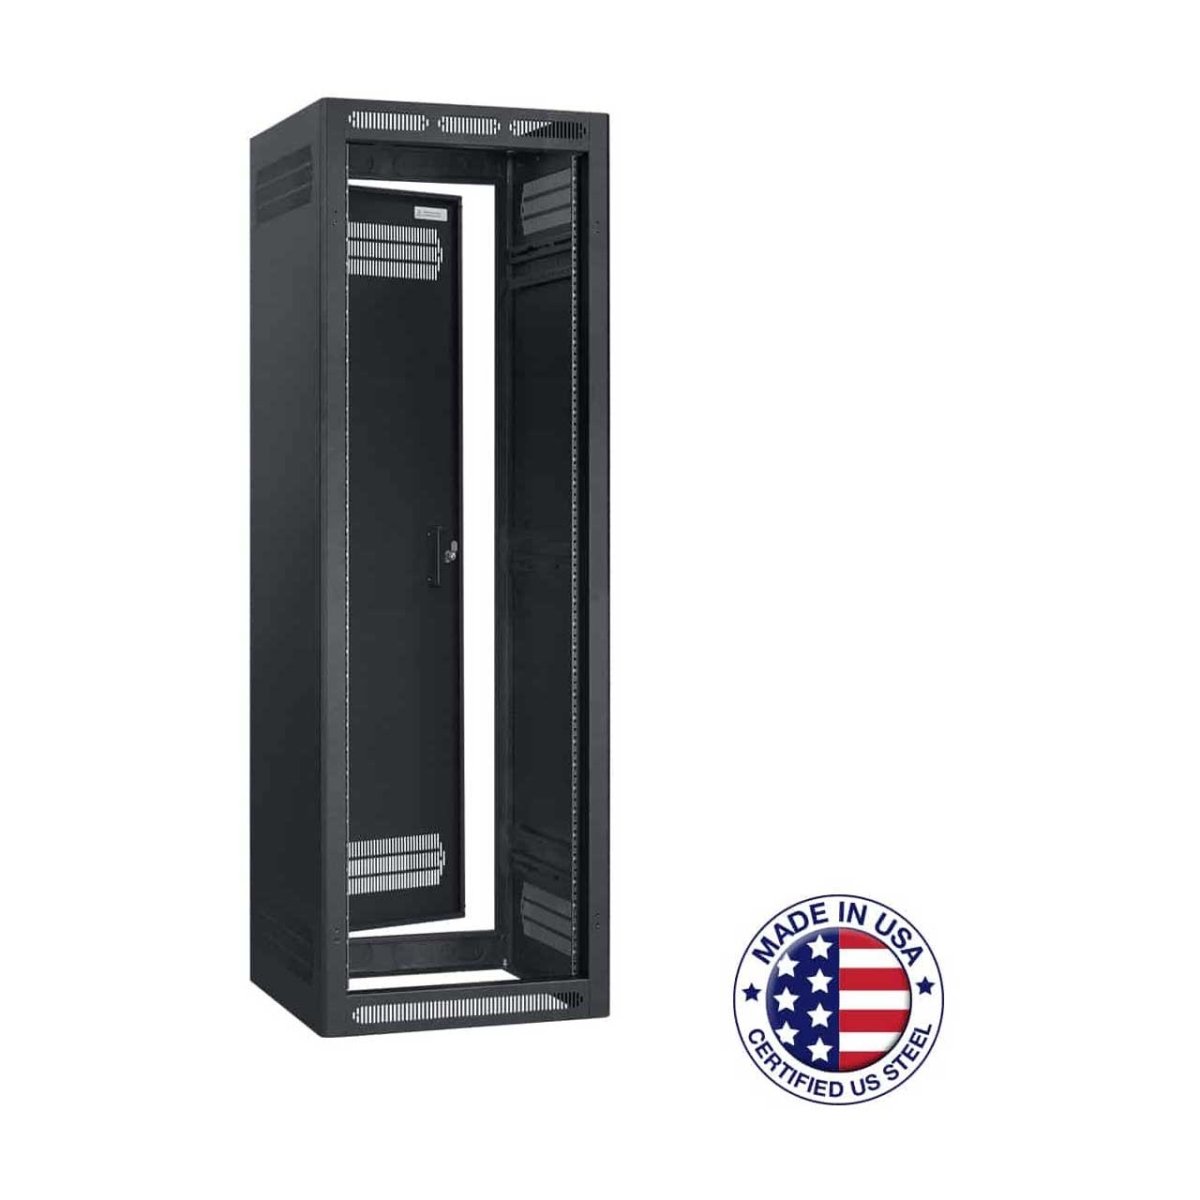 Picture of Lowell Manufacturing LMC-LER-3522 LER-3522 35RU Enclosed Rack with Rear Door - 22 in. Deep